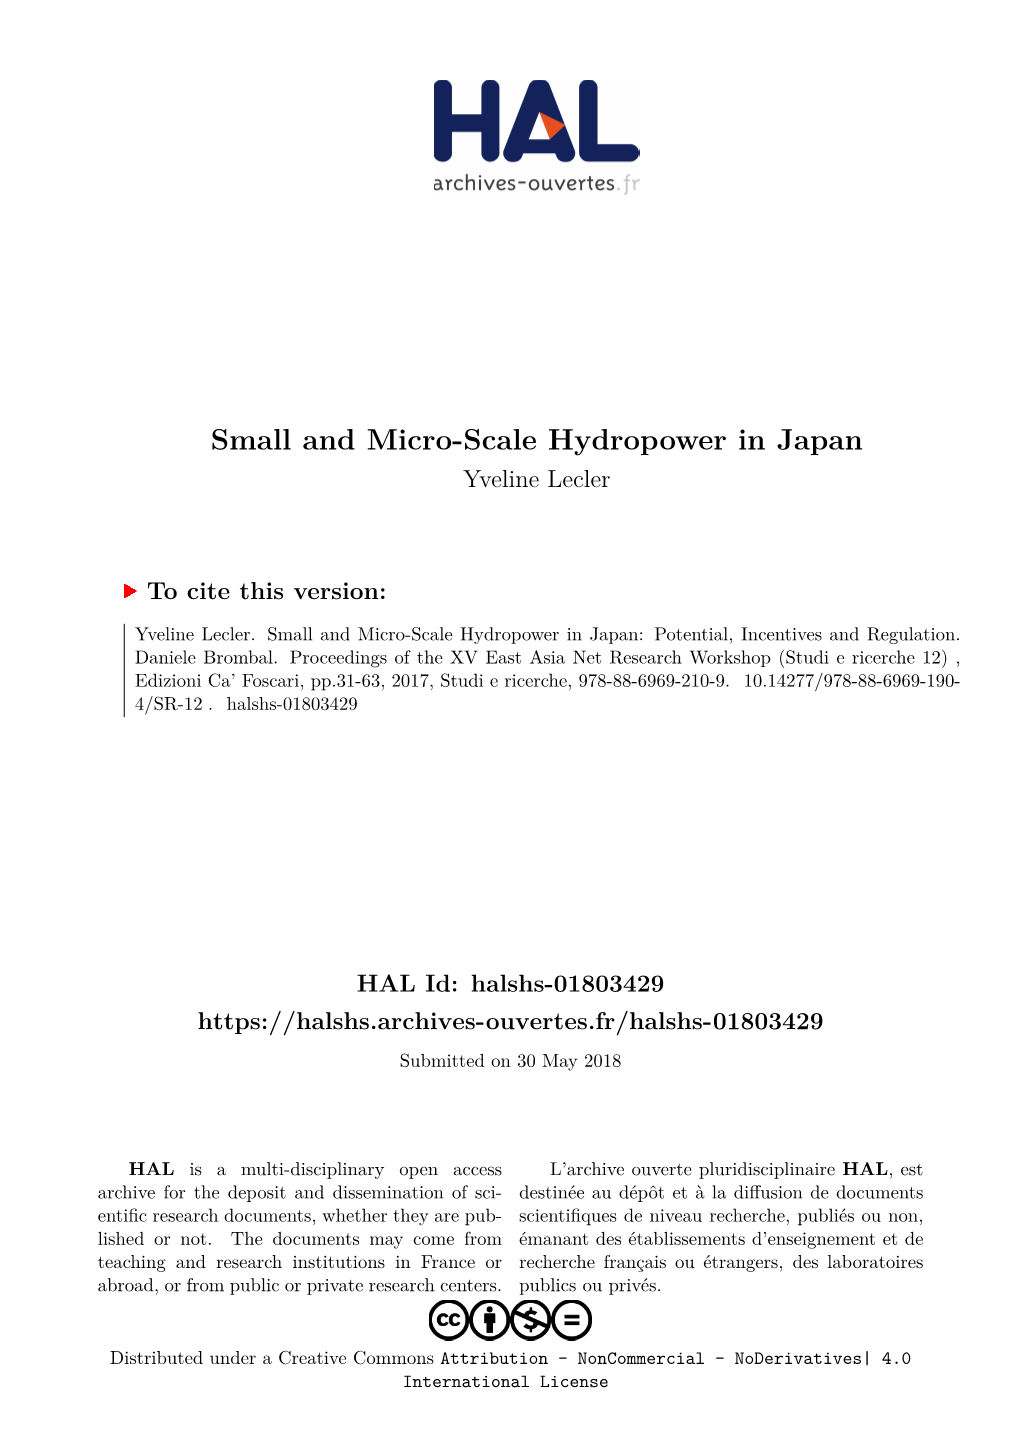 Small and Micro-Scale Hydropower in Japan Yveline Lecler